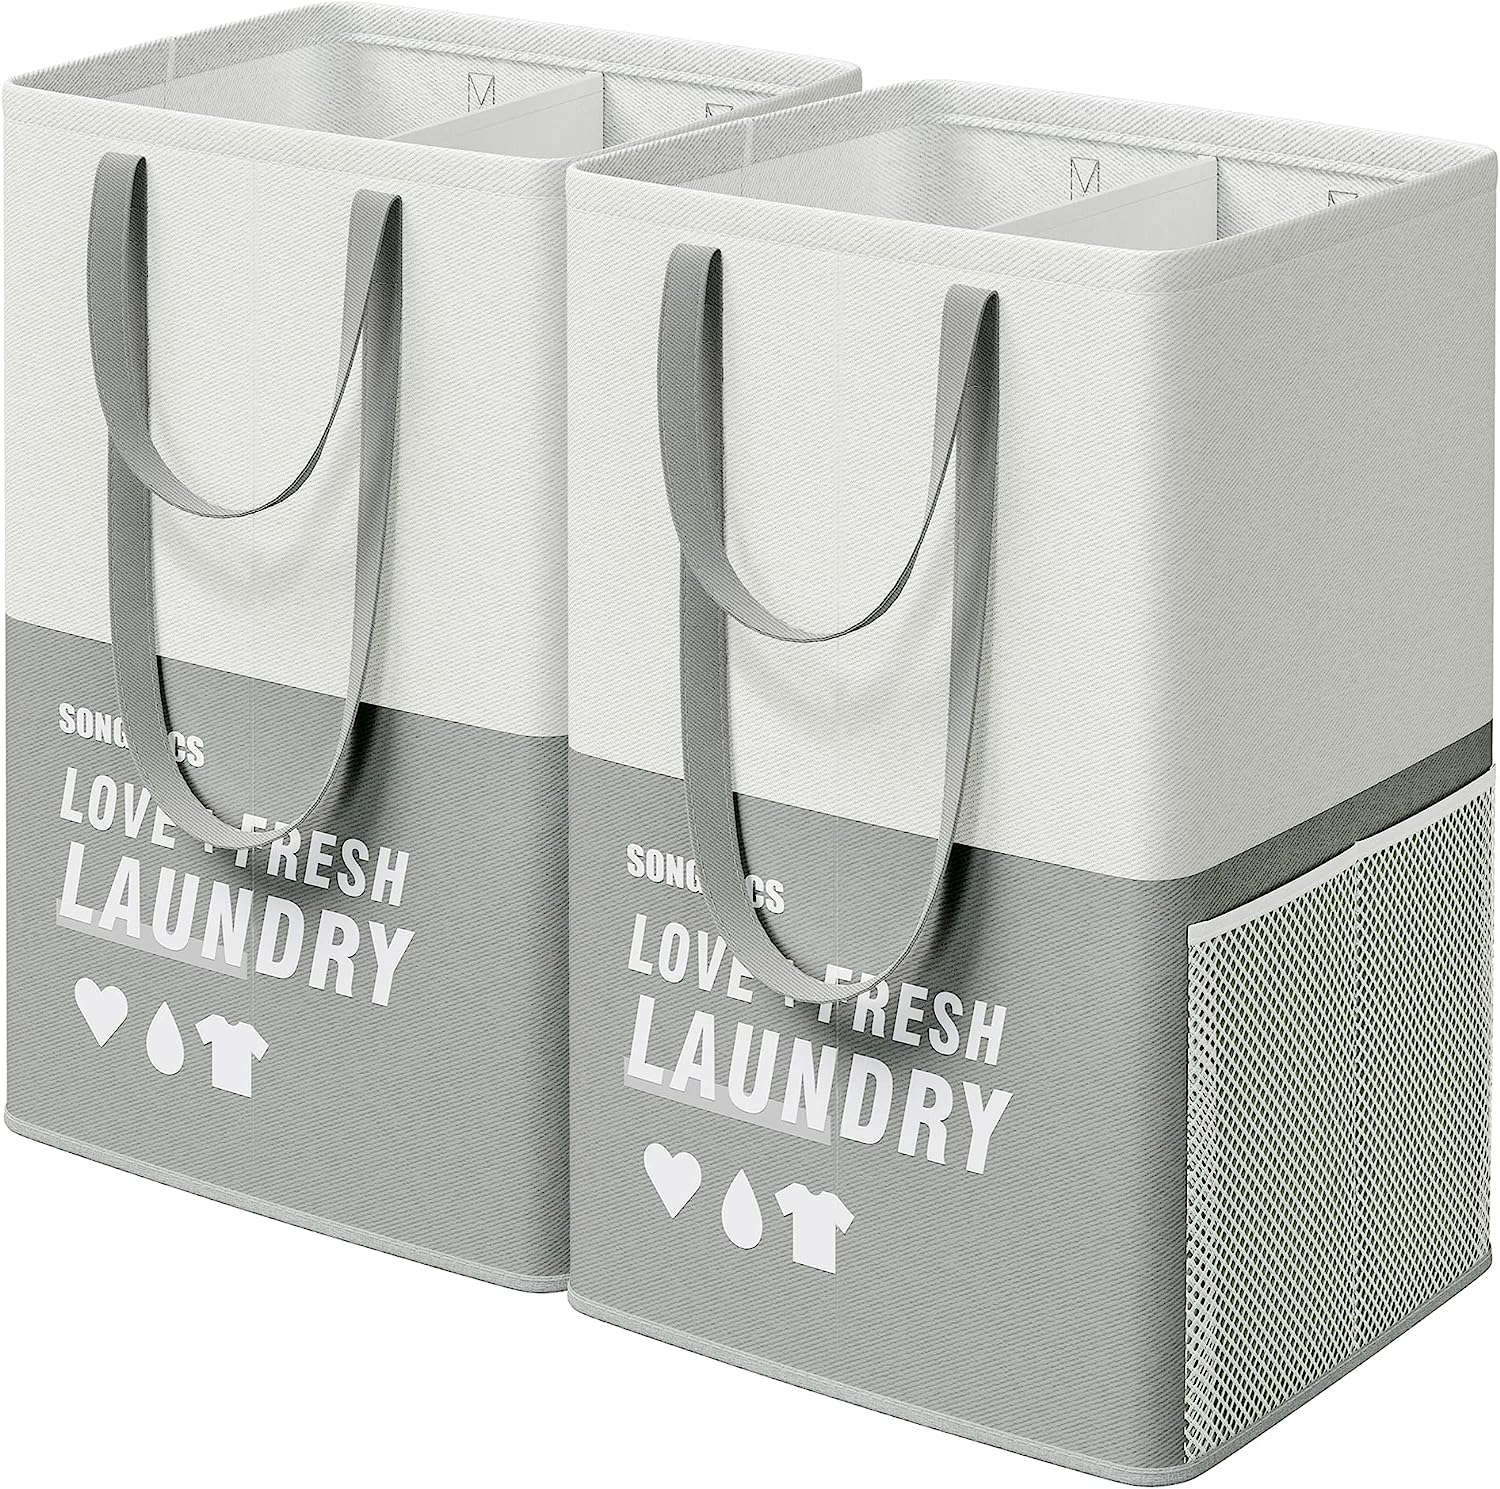 Blushbees® Set of 2 Collapsible Laundry Baskets